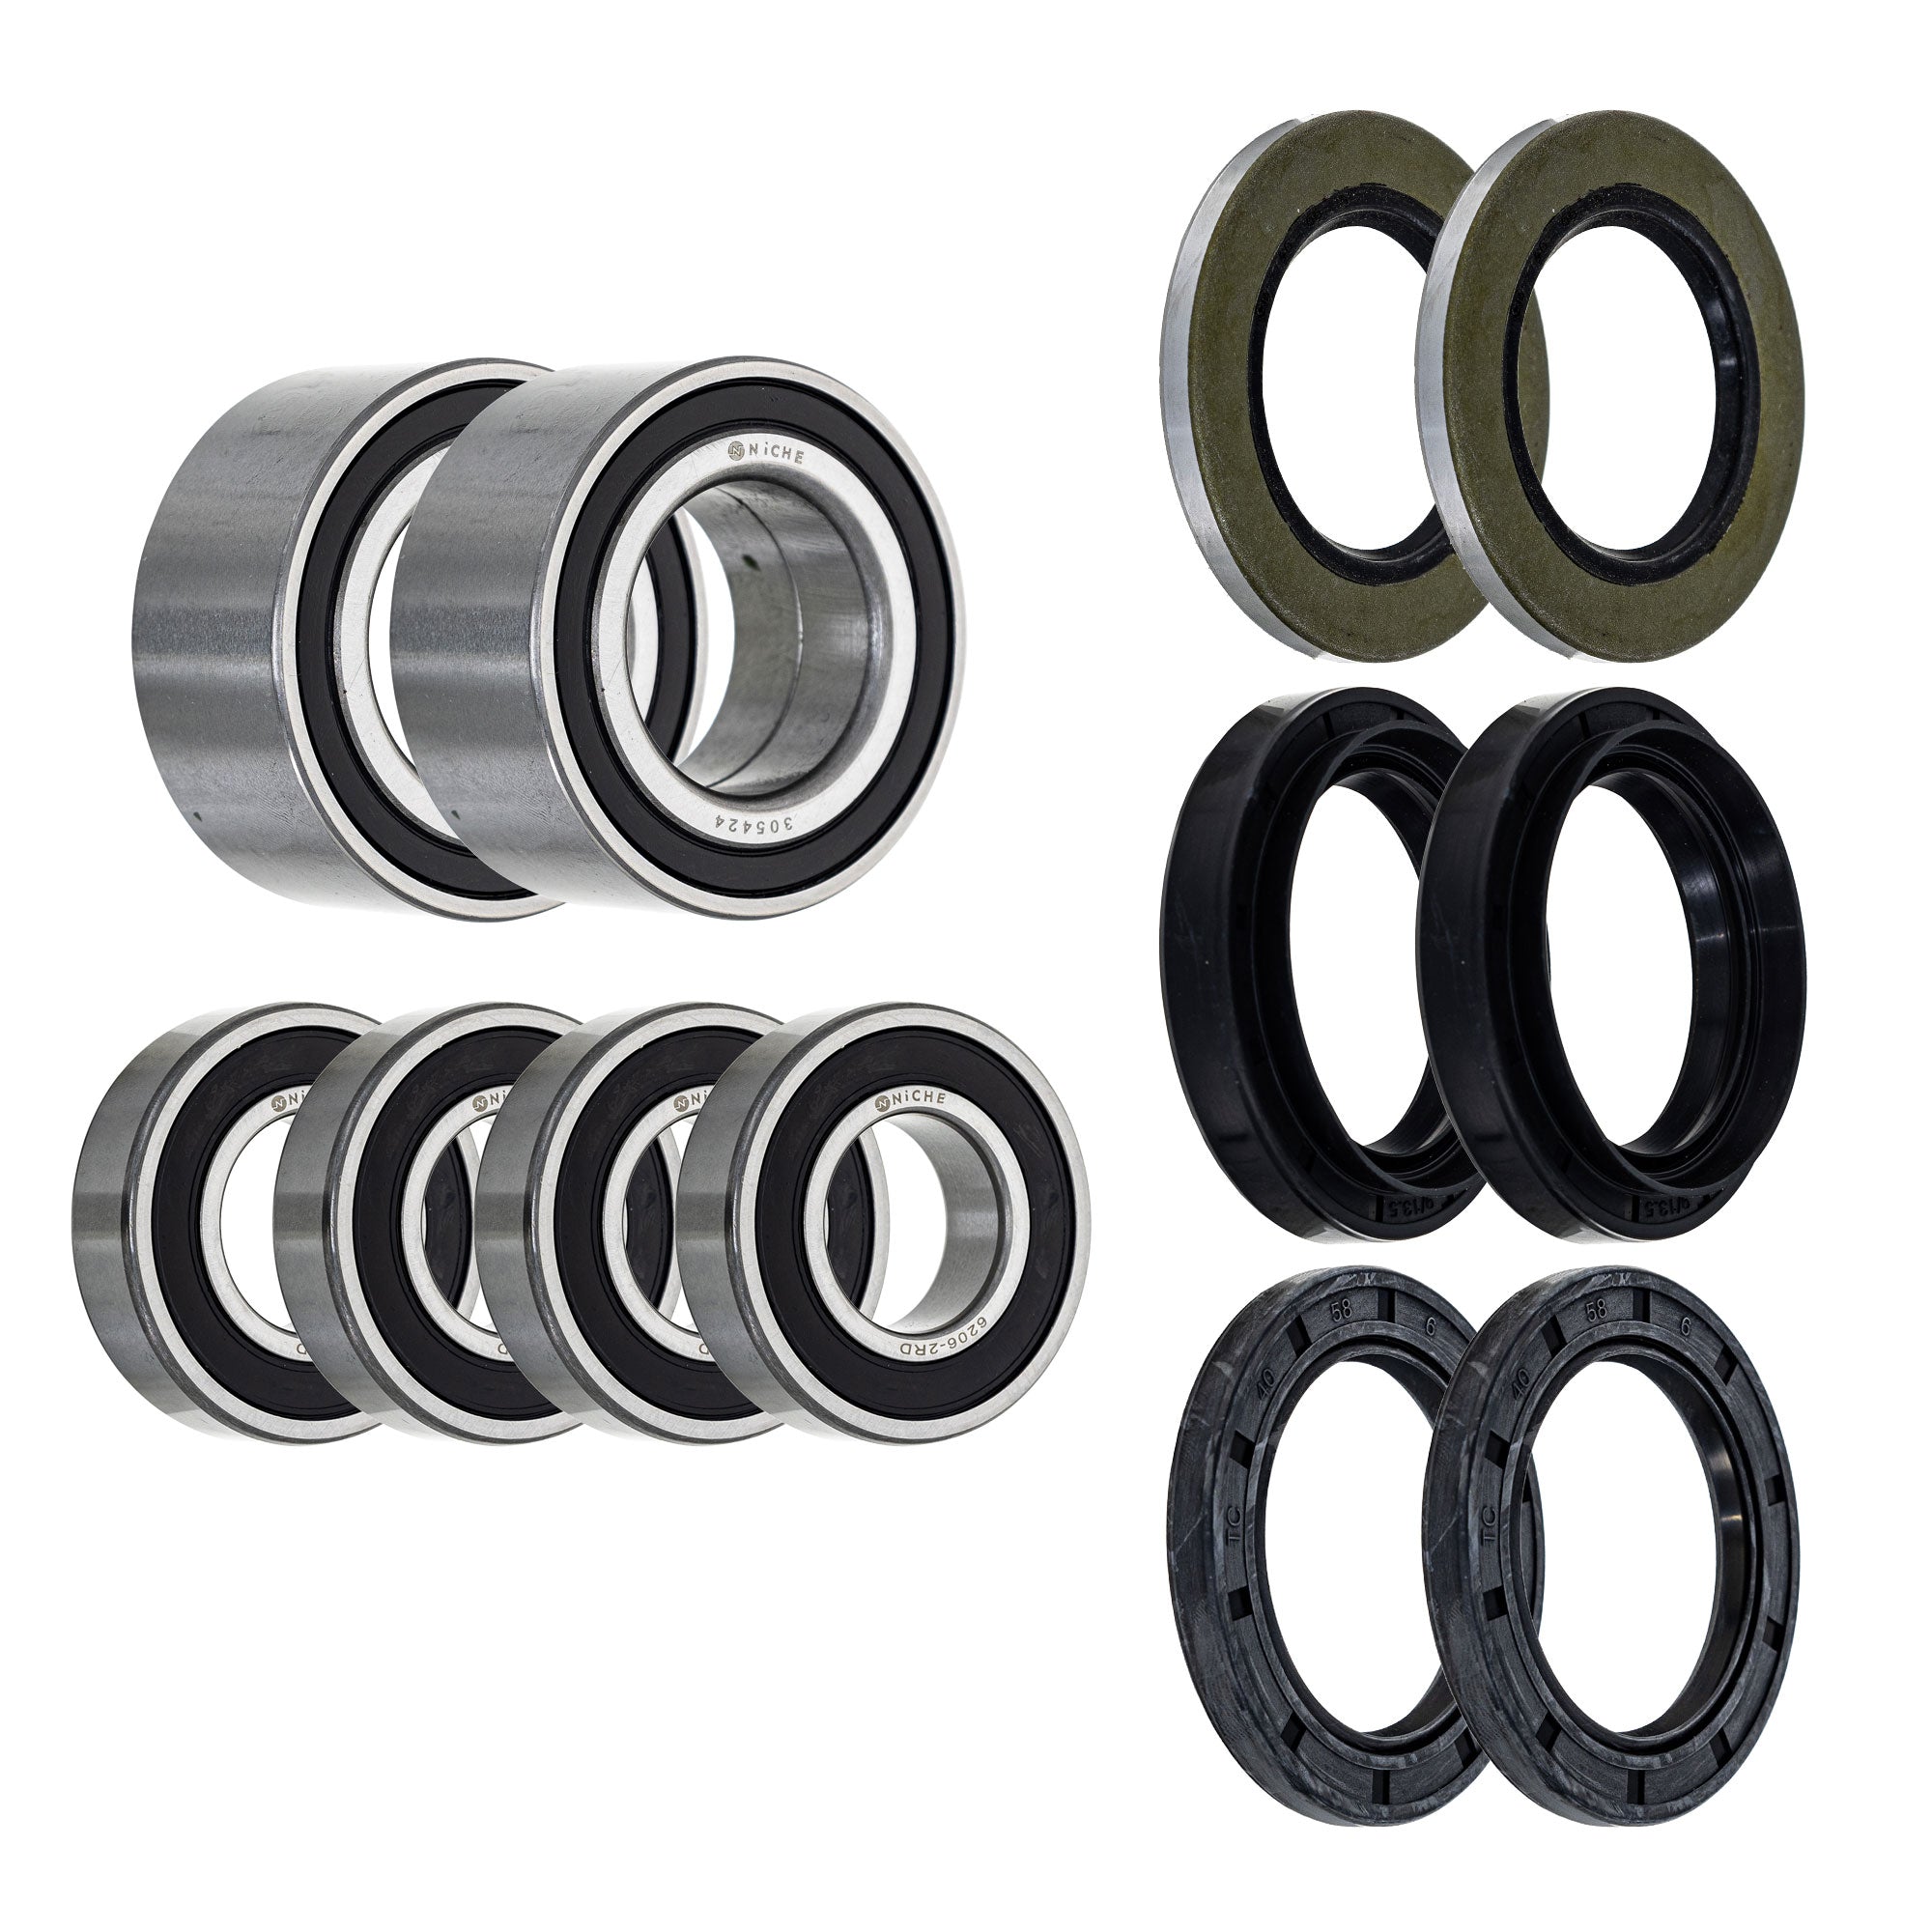 Wheel Bearing Seal Kit for zOTHER Traxter NICHE MK1008342